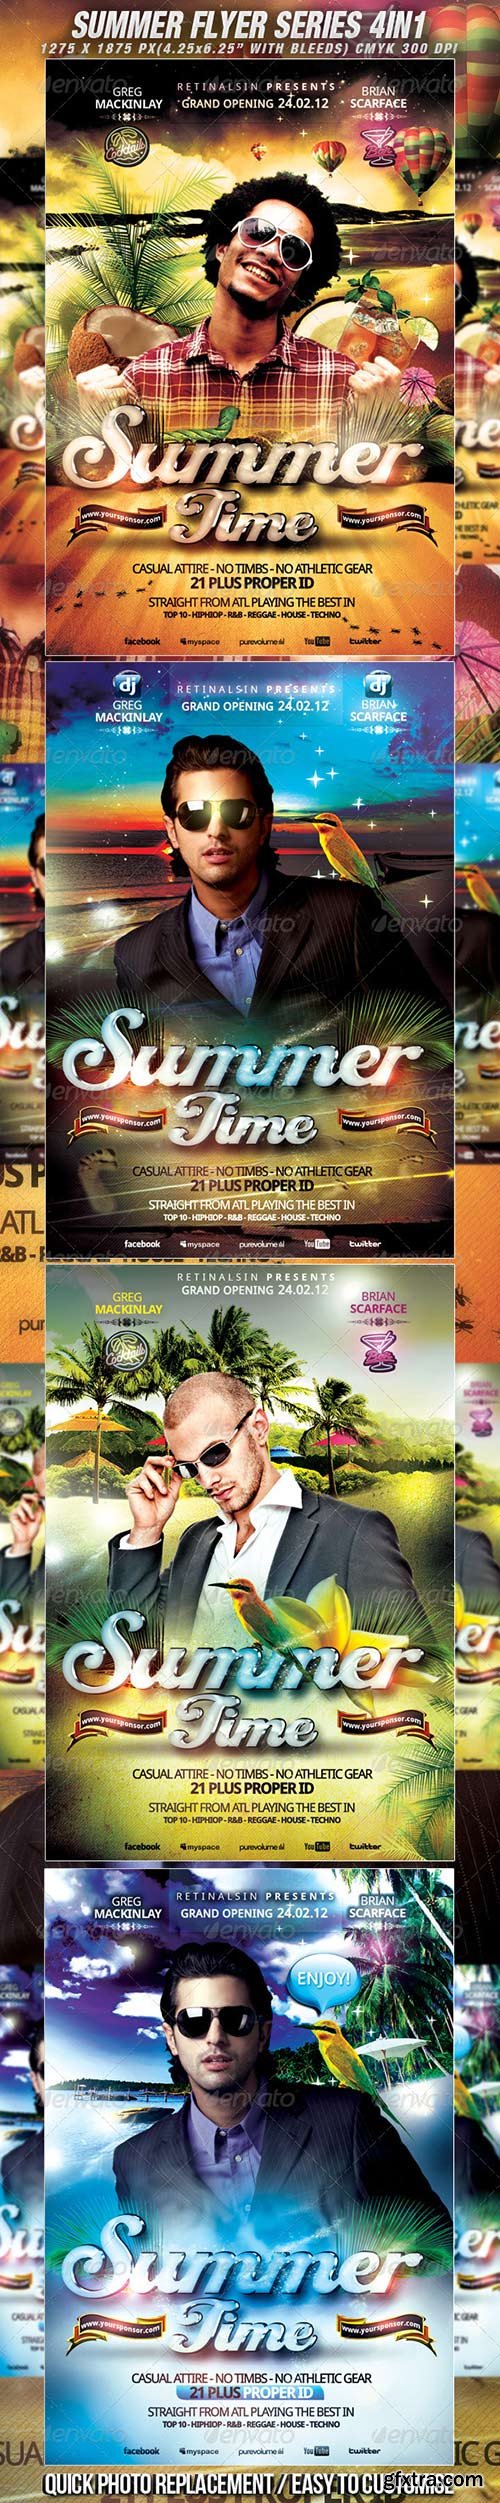 GraphicRiver - Summer Flyer Series - 4in1 / High Quality